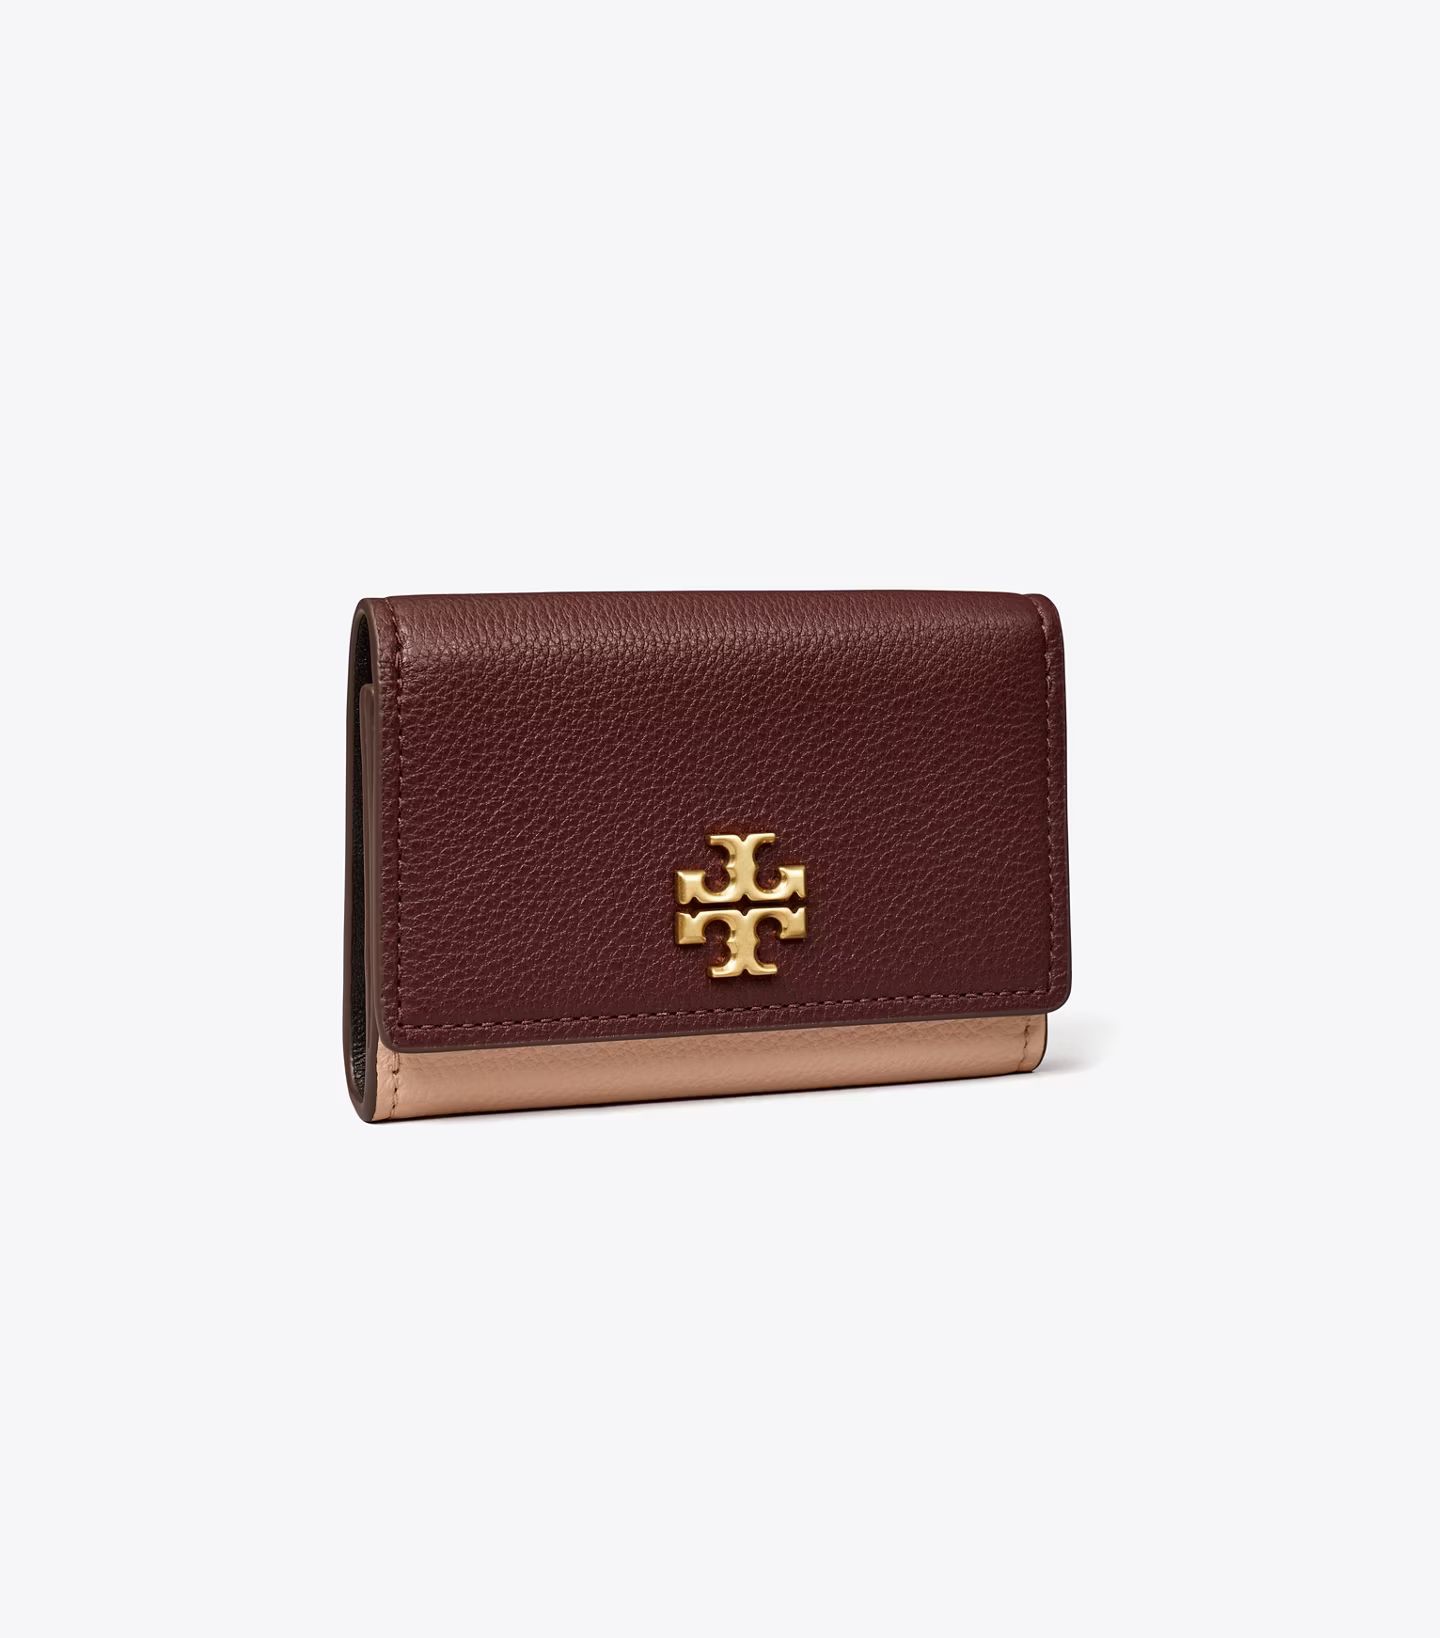 Limited-Edition Wallet: Women's Designer Wallets | Tory Burch | Tory Burch (US)